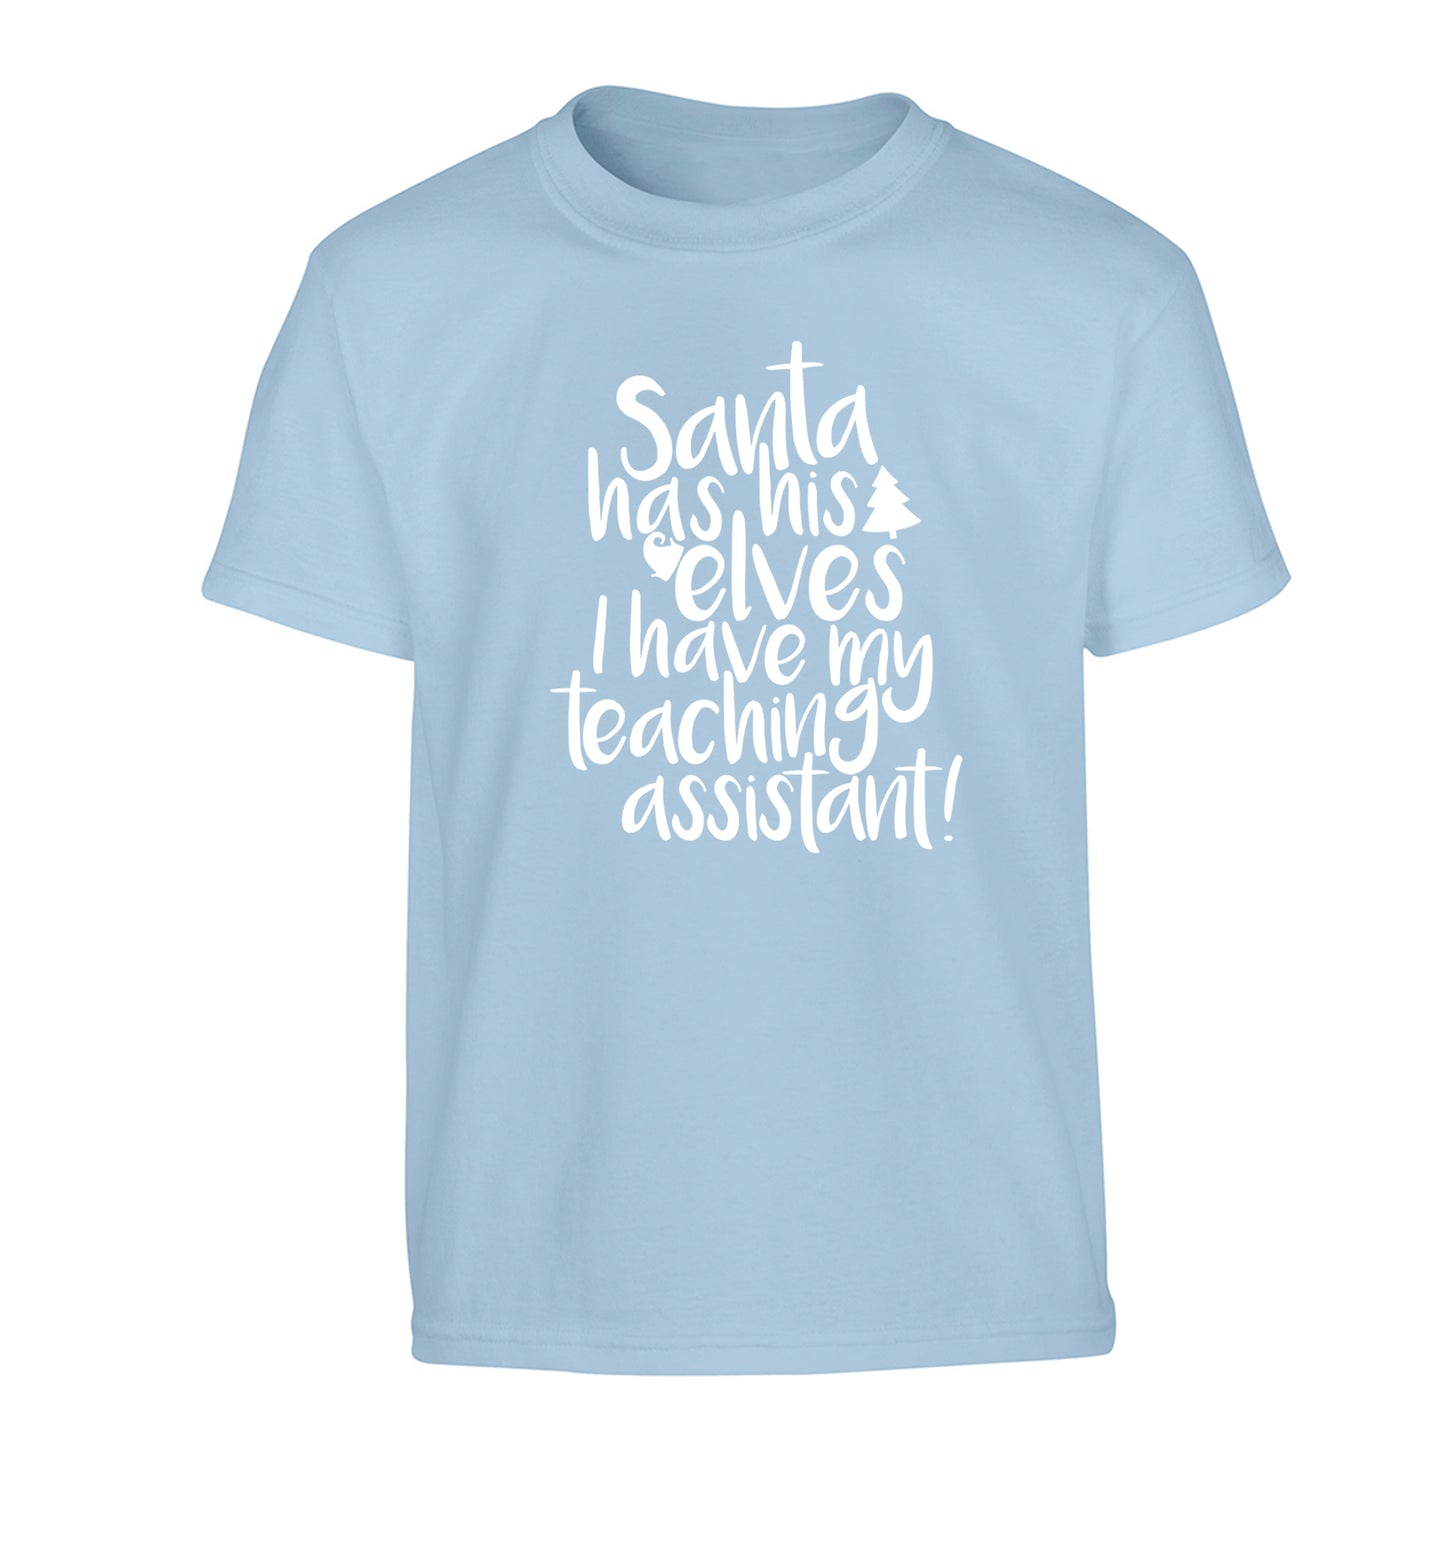 Santa has his elves I have my teaching assistant Children's light blue Tshirt 12-14 Years